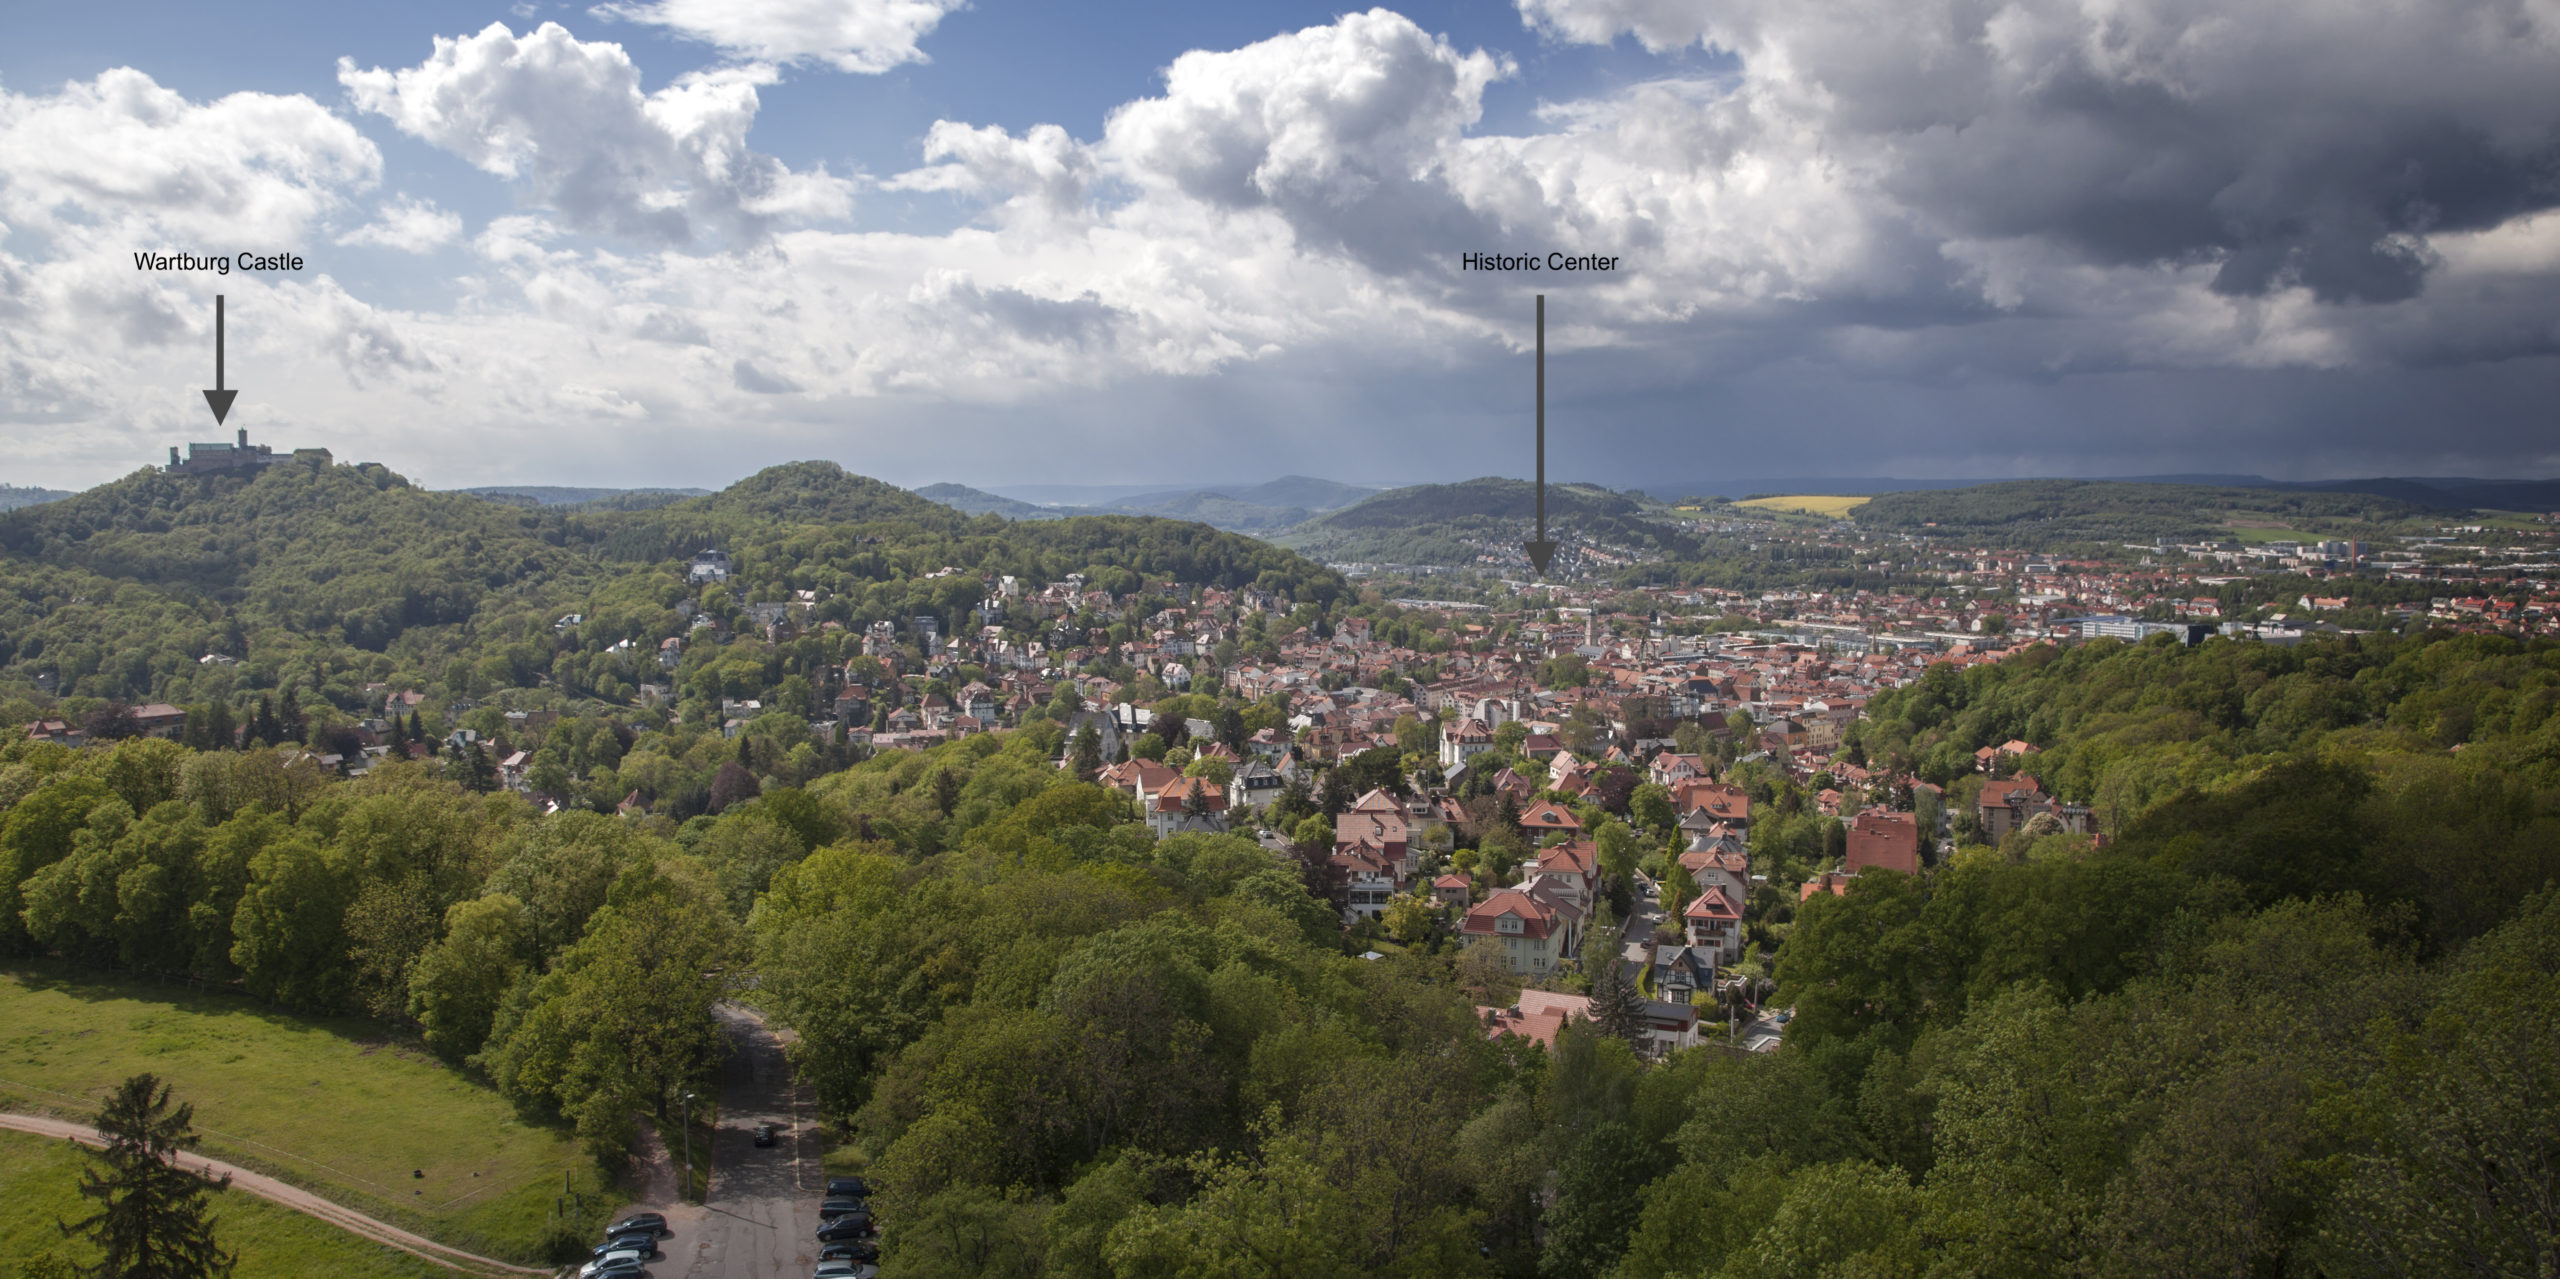 Eisenach, a city of music and inspiration…